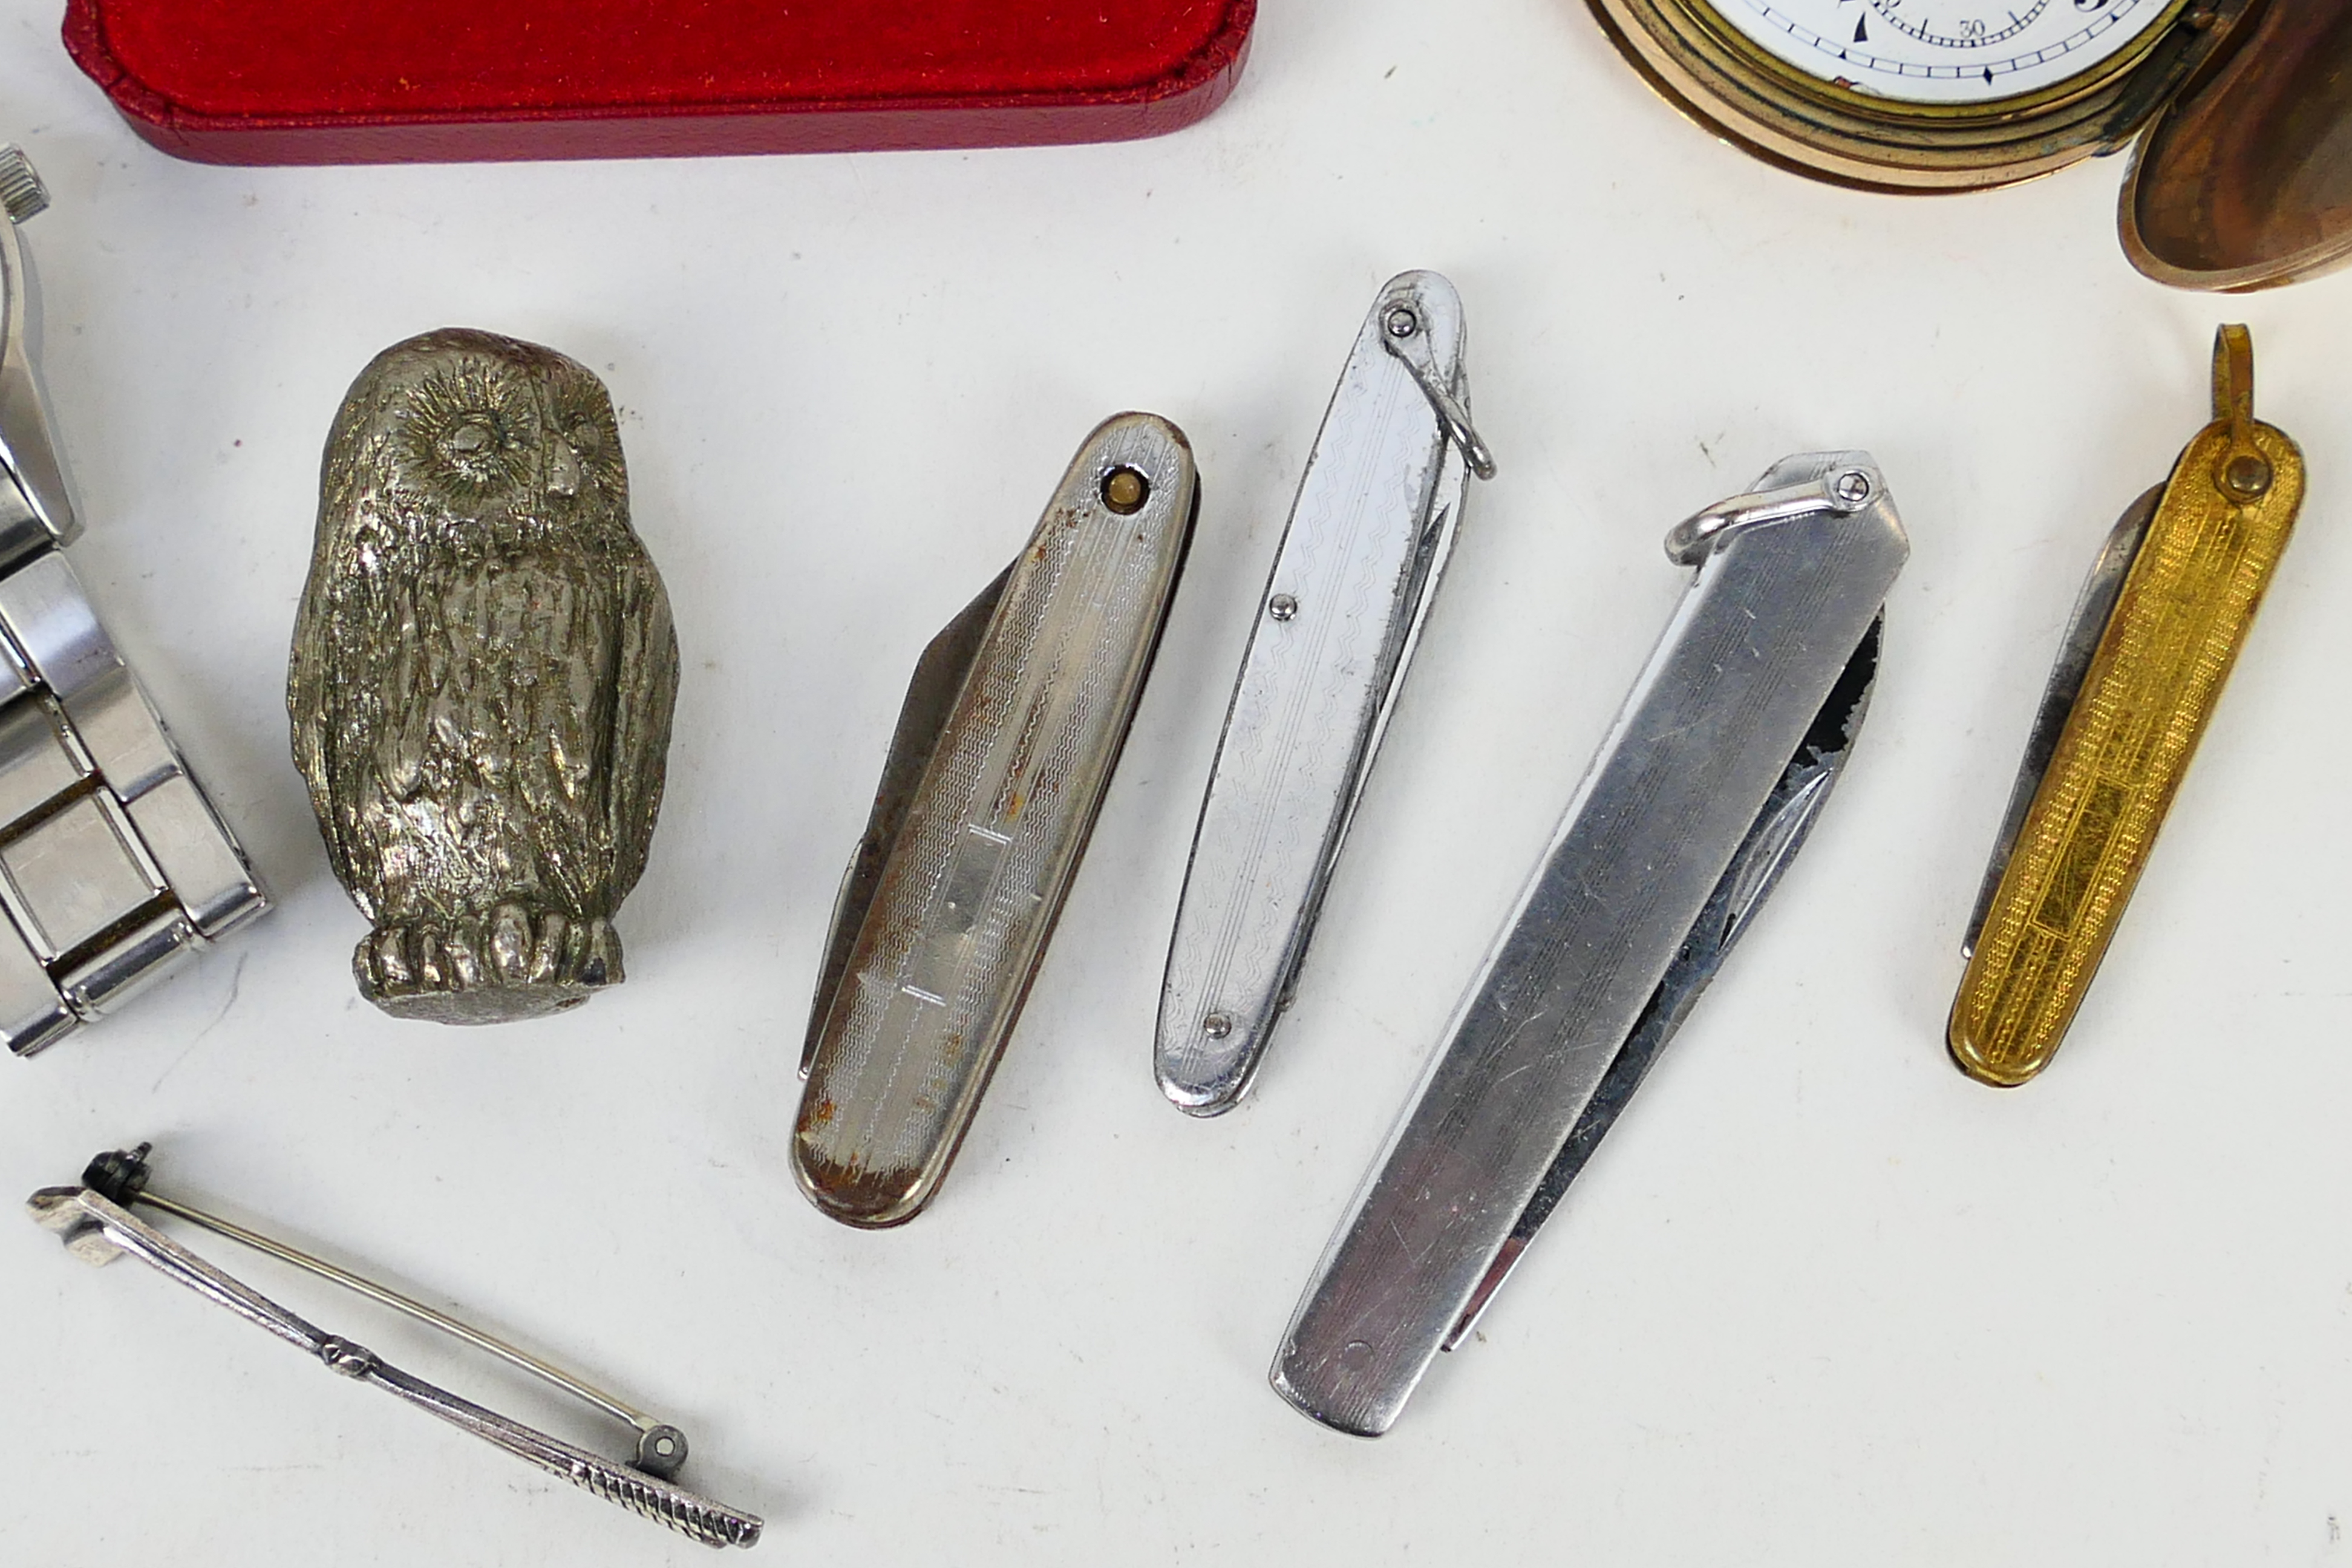 Lot to include wrist watch, gold plated full hunter pocket watch (A/F), penknives, - Image 4 of 6